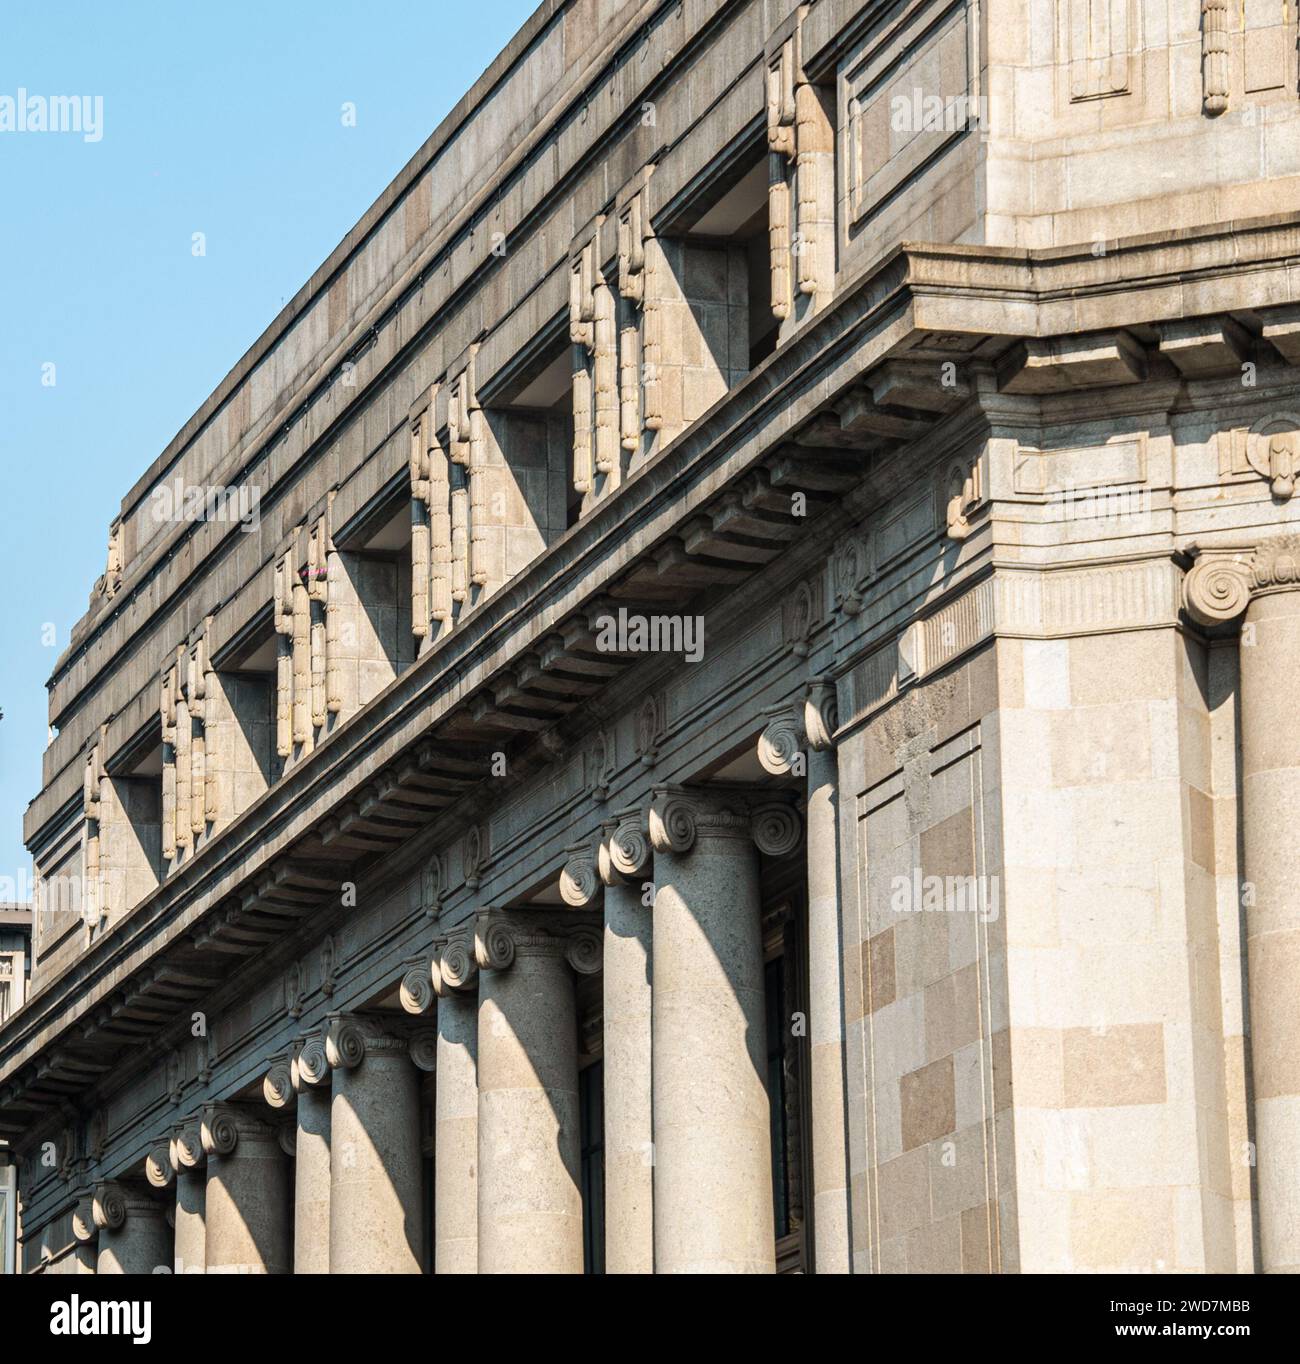 A historic building in Wuhan showcasing exquisite columns Stock Photo